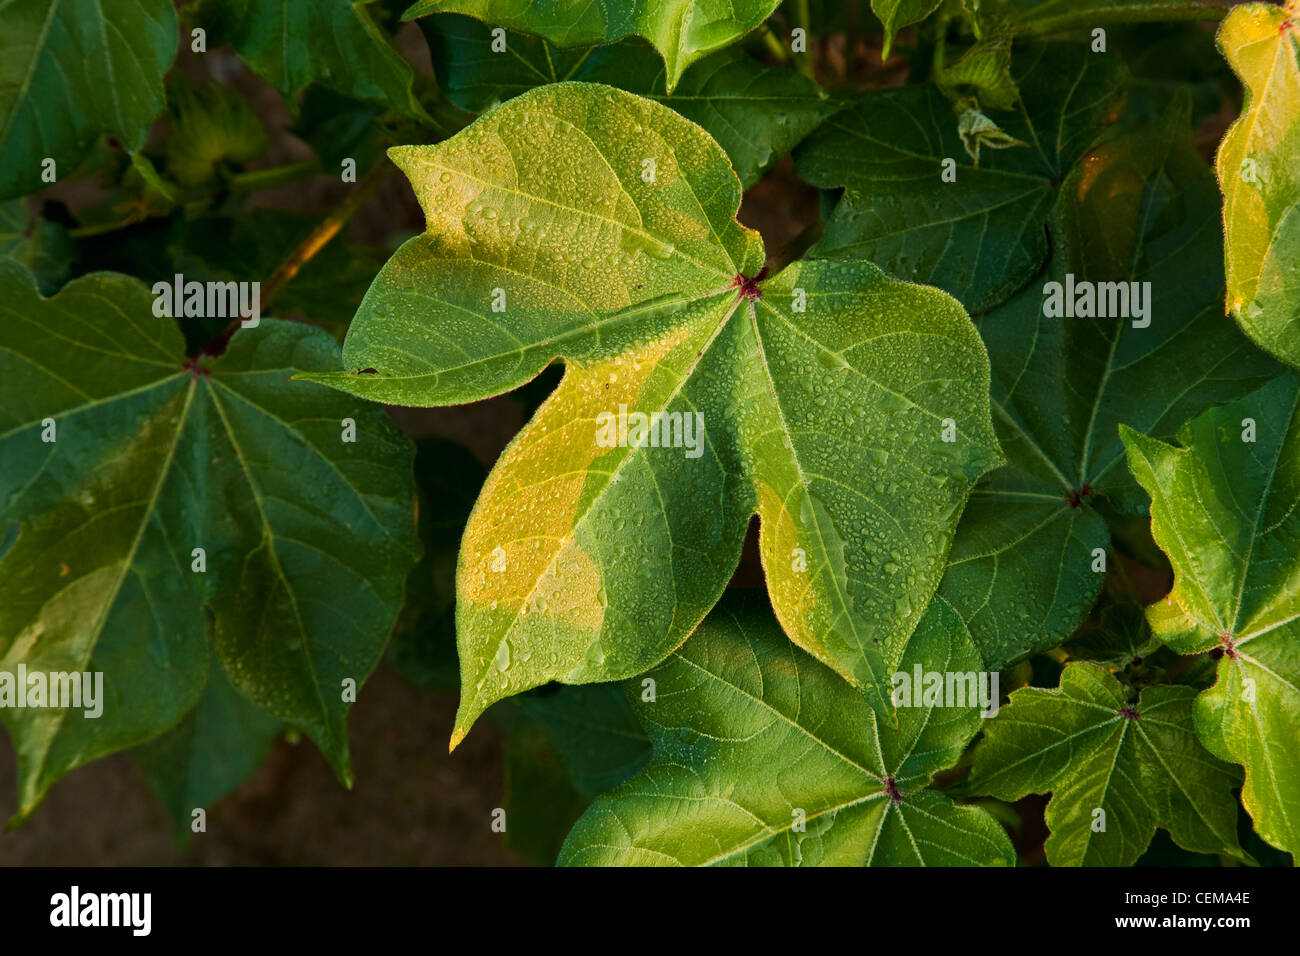 Early morning light and dew drops on healthy mid growth cotton foliage at the peak of boll set / near England, Arkansas, USA. Stock Photo